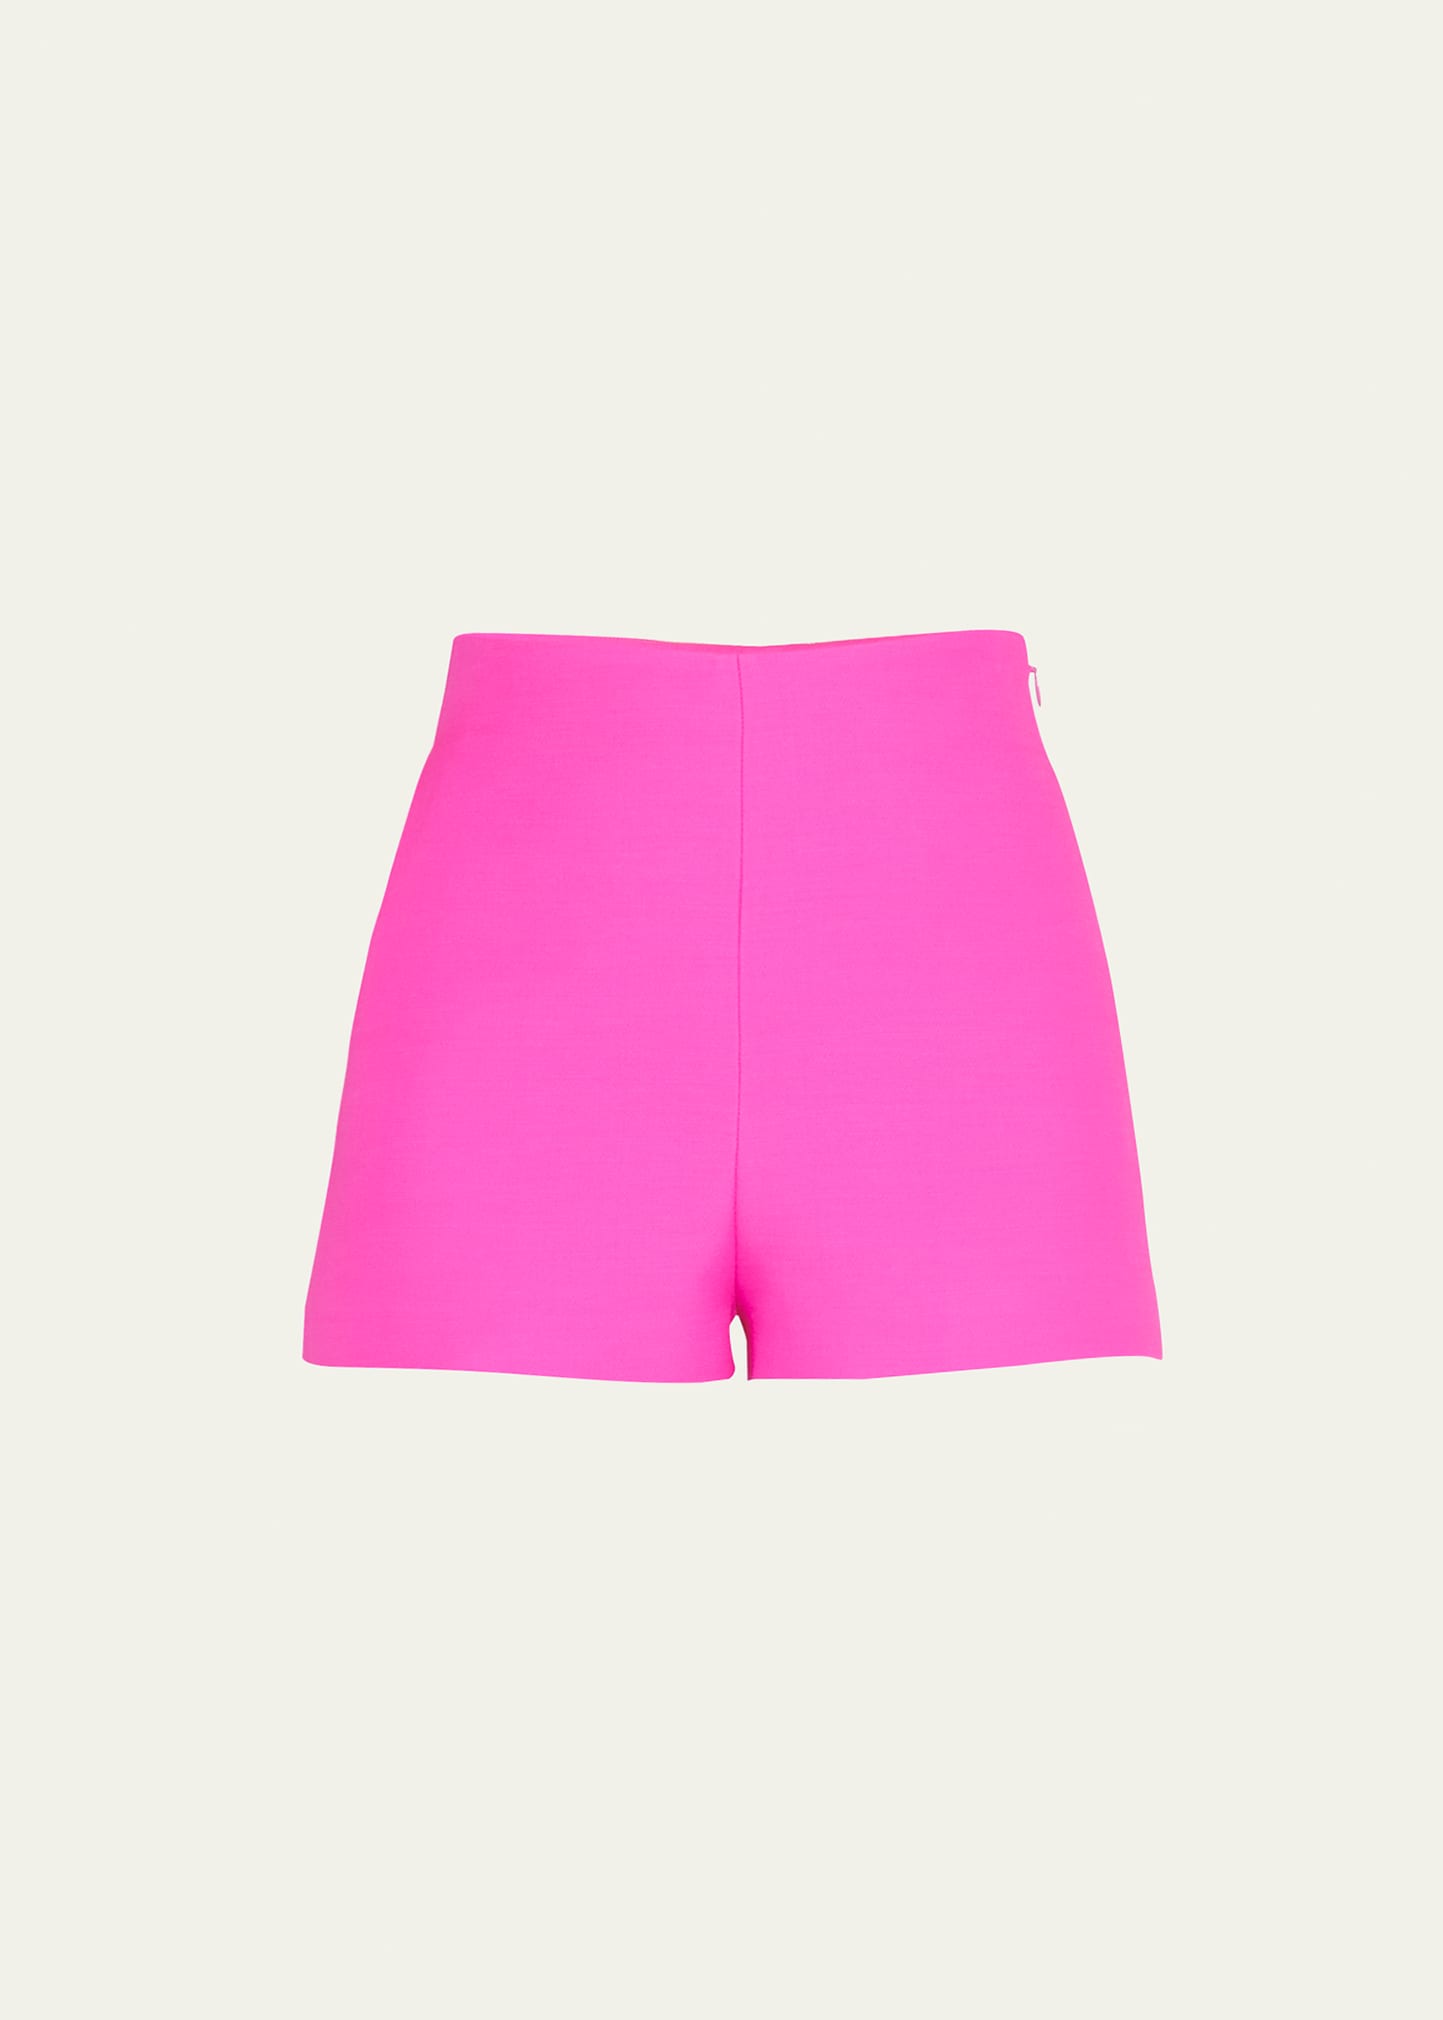 Crepe Couture Tailored Shorts